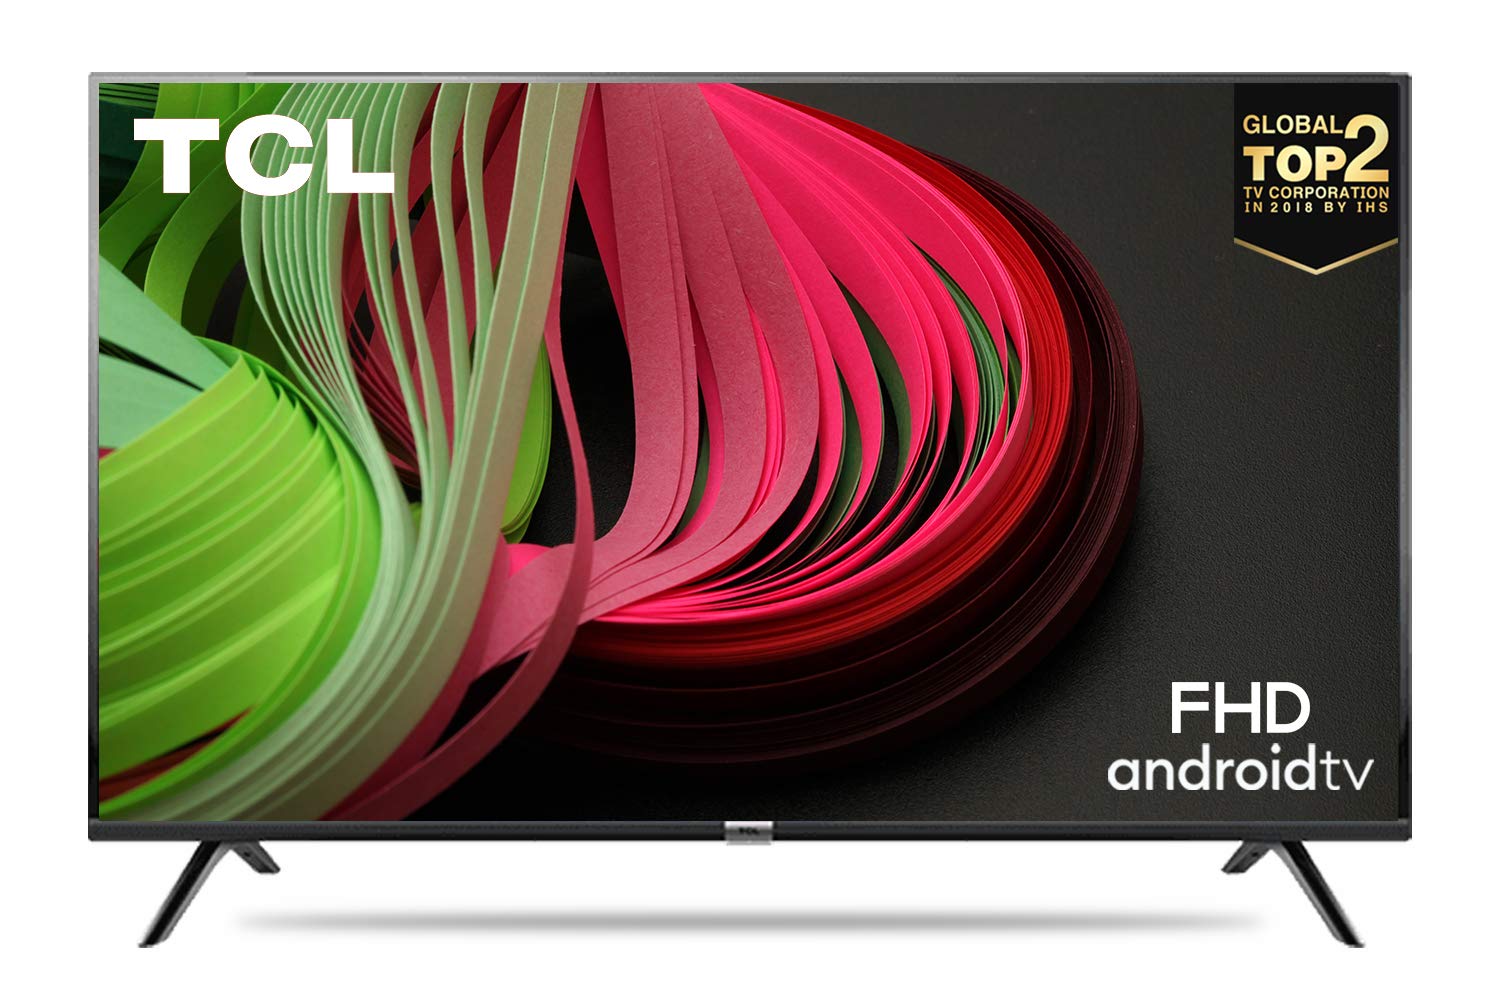 TCL 100 cm (40 inches) Full HD Smart Certified Android LED TV Best 4k